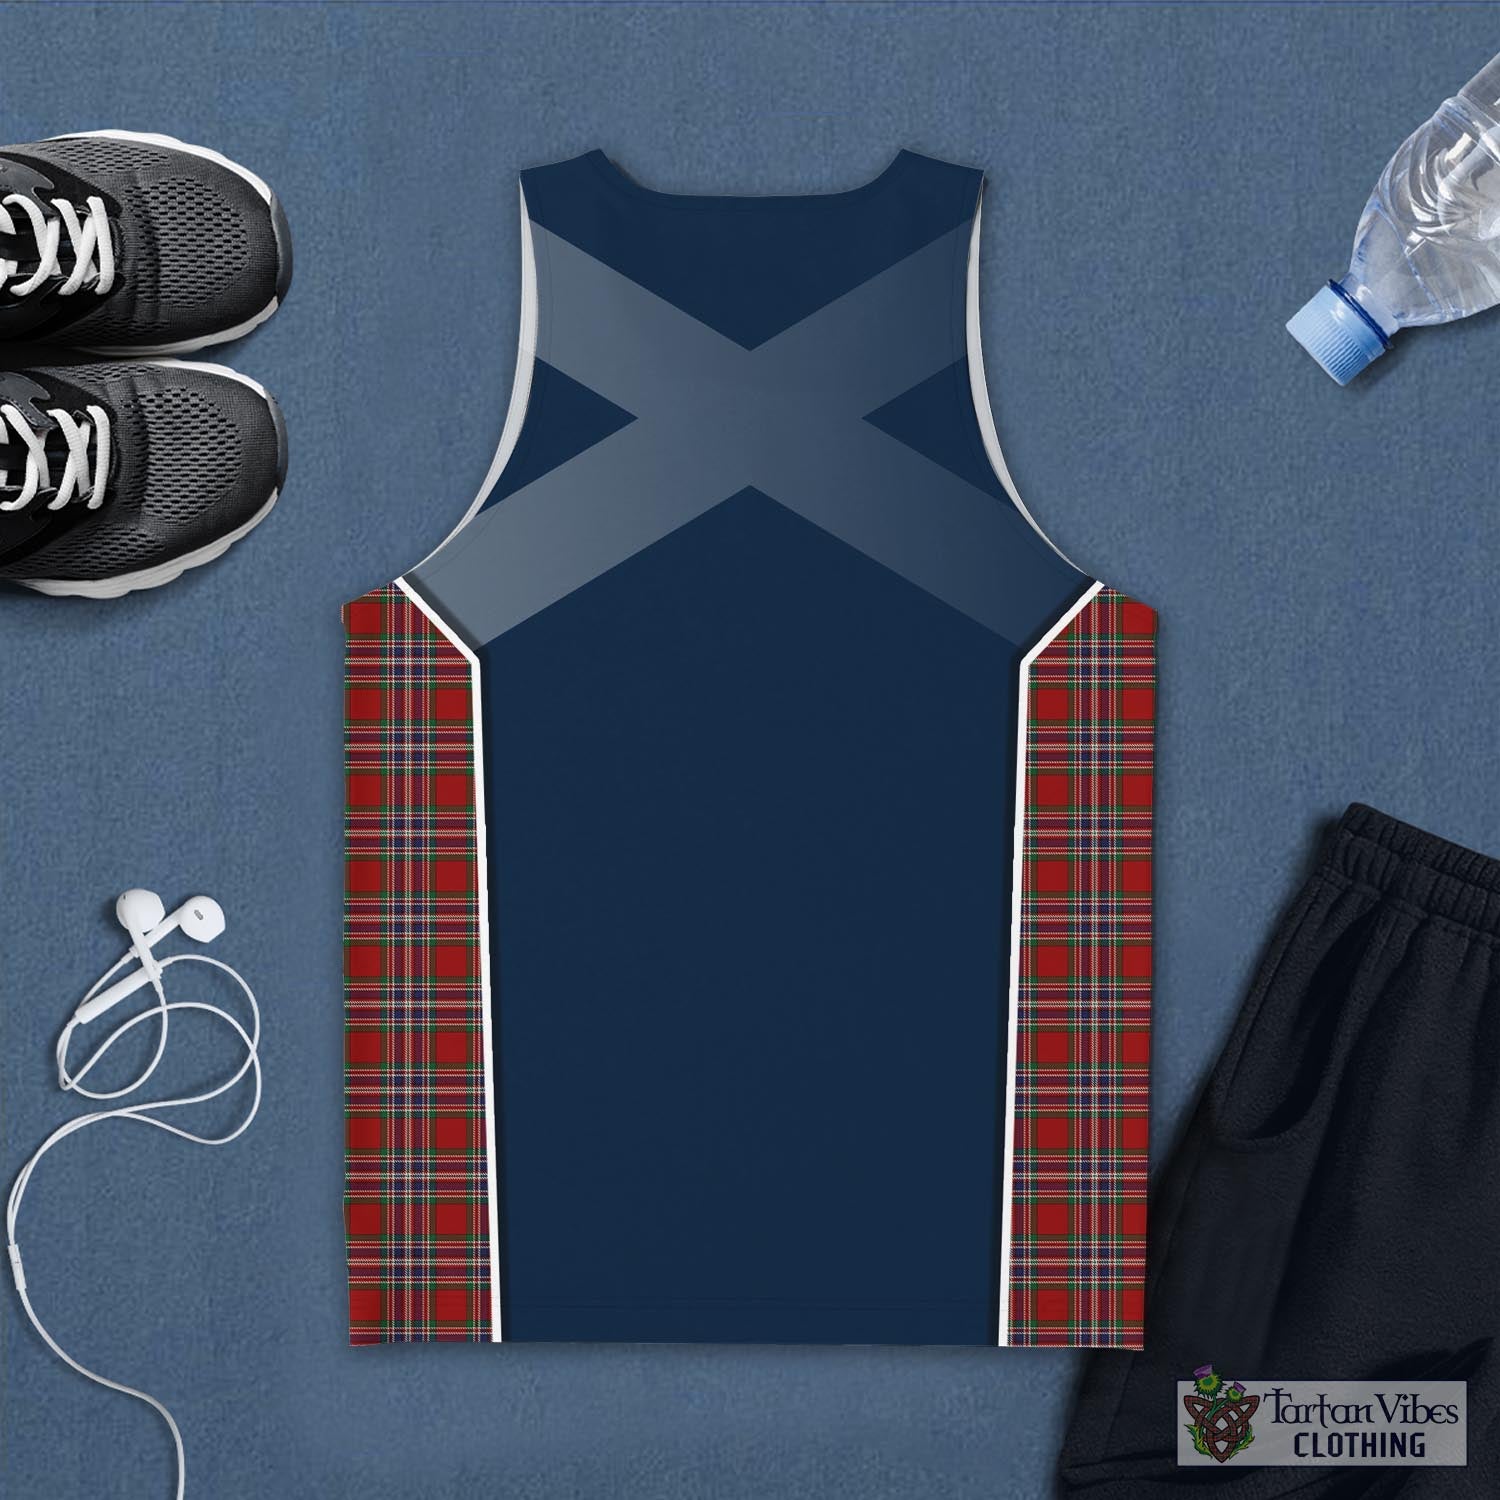 Tartan Vibes Clothing MacFarlane Red Tartan Men's Tanks Top with Family Crest and Scottish Thistle Vibes Sport Style